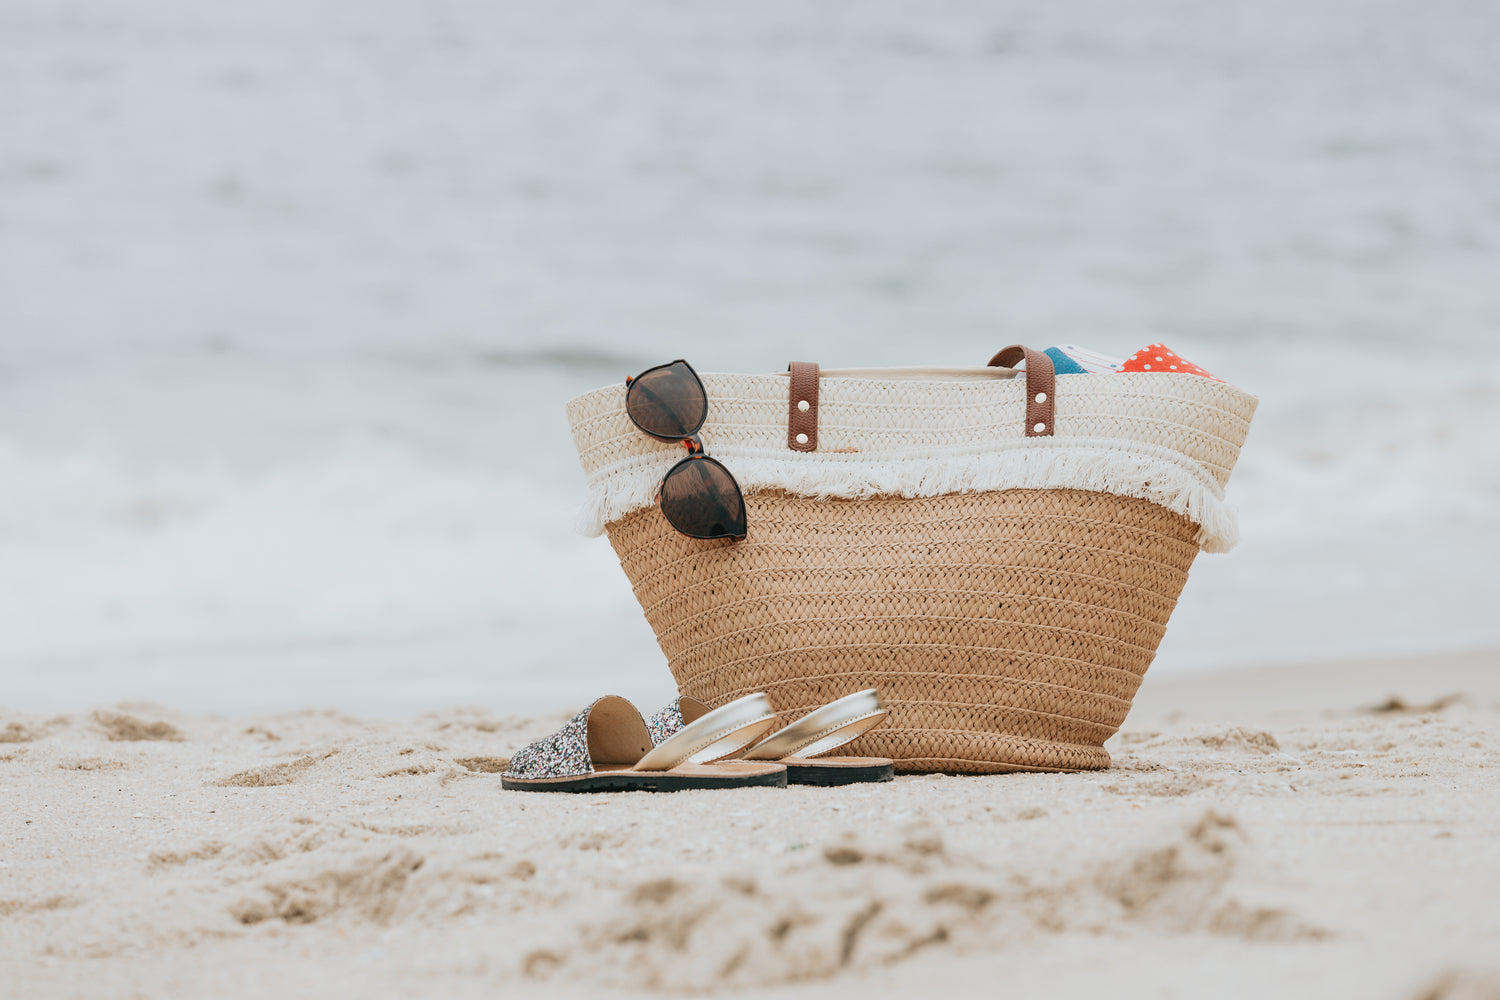 Photo of a wicker beach bag and sandals on a white sandy beach.